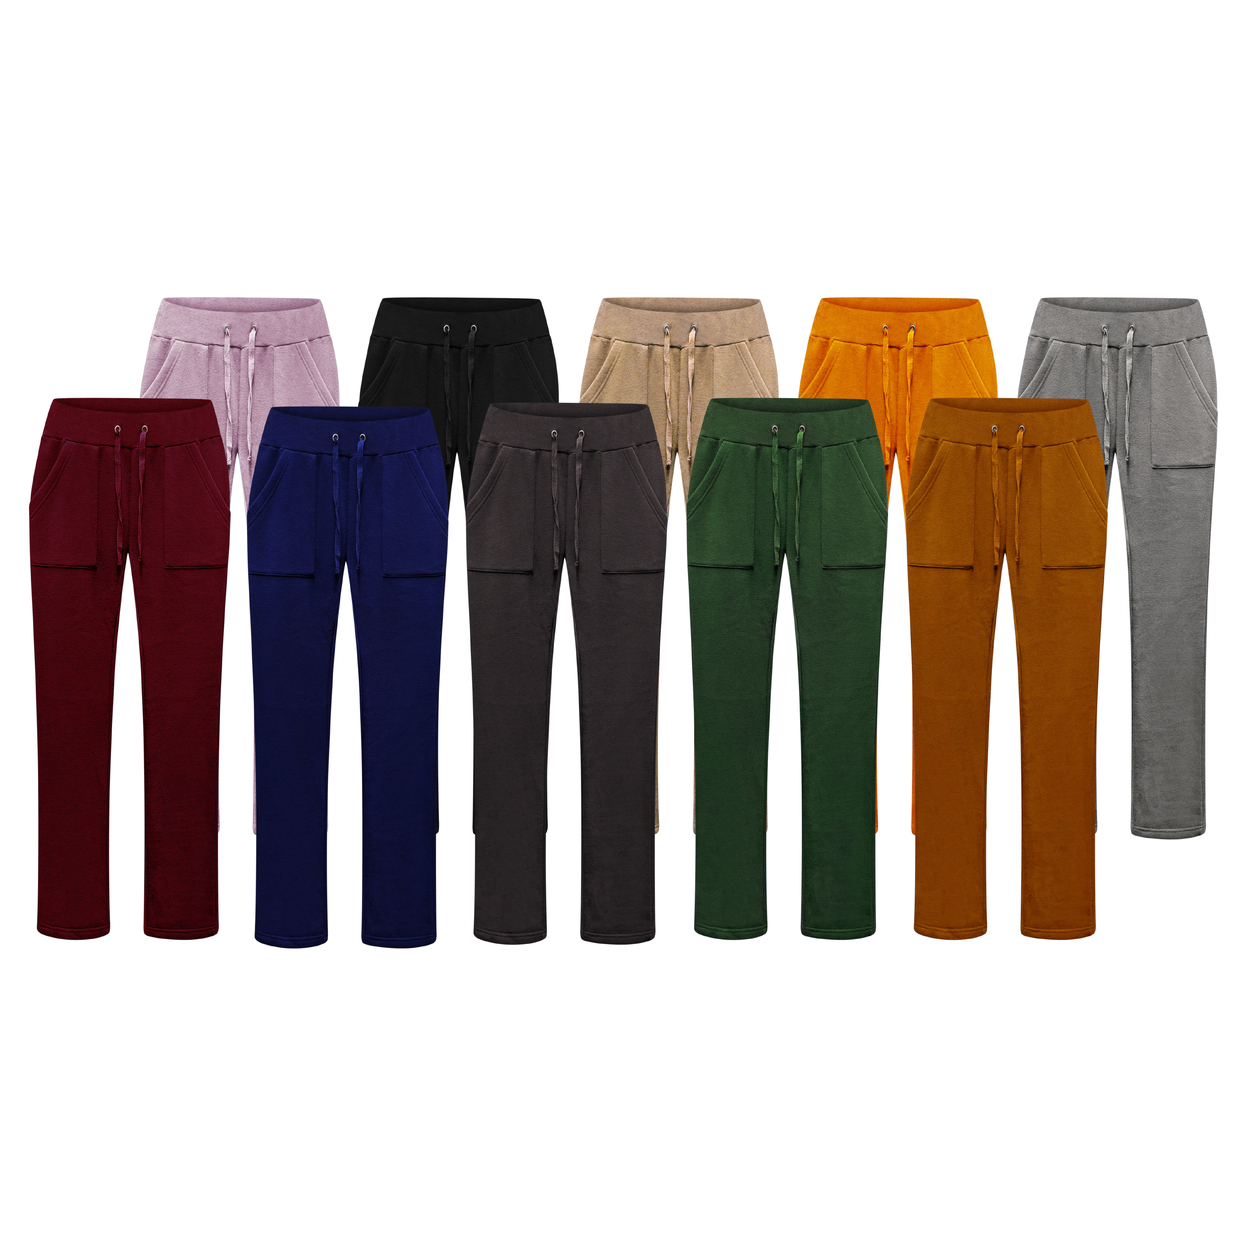 Women's Ultra Soft Cozy Fleece Lined Elastic Waistband Terry Knit Pants - Assorted, Large